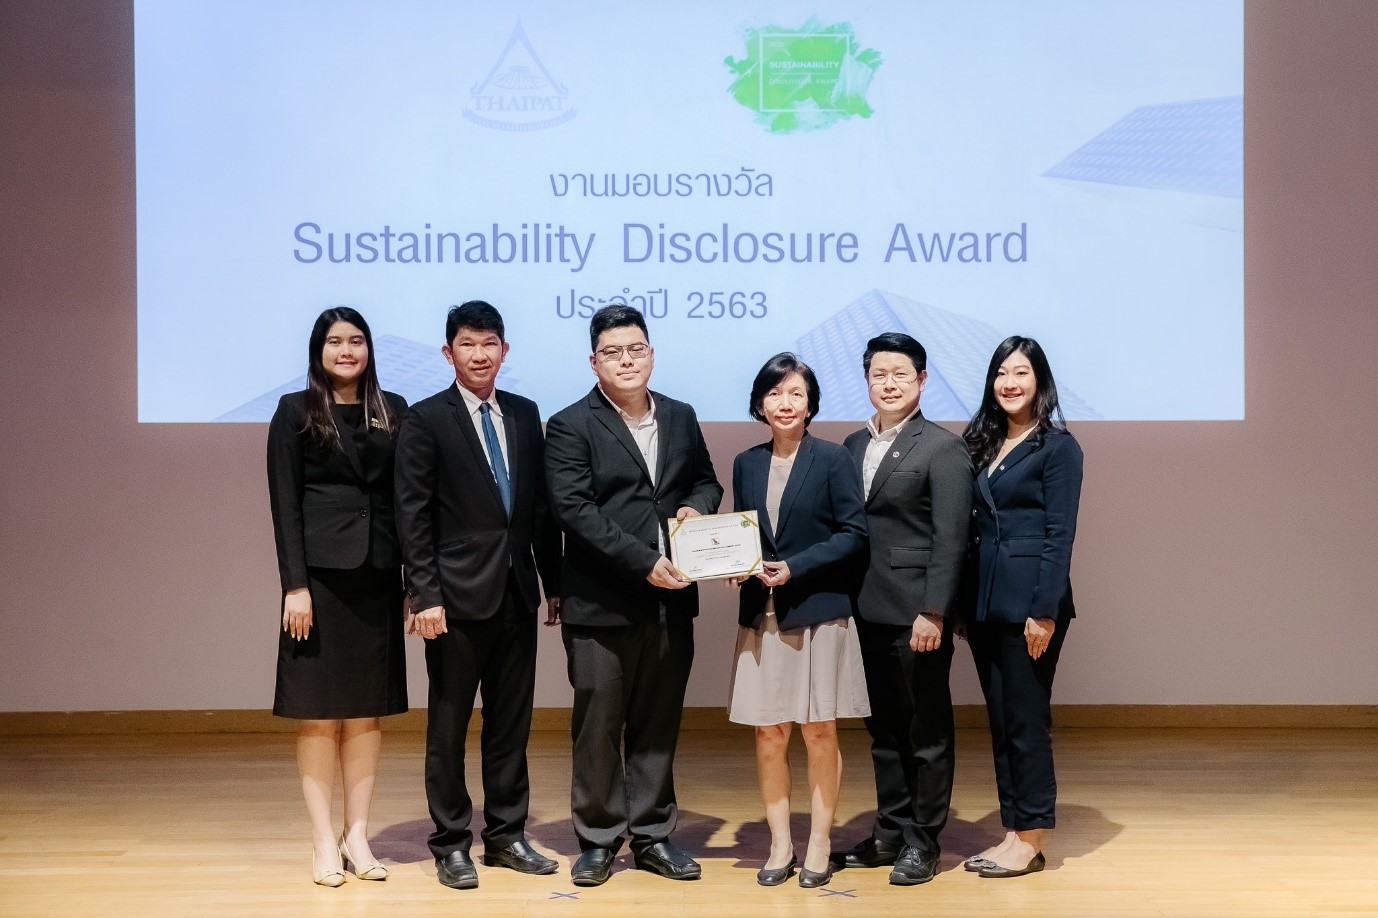 Sustainability Disclosure Award 2020 from Thaipat Institute